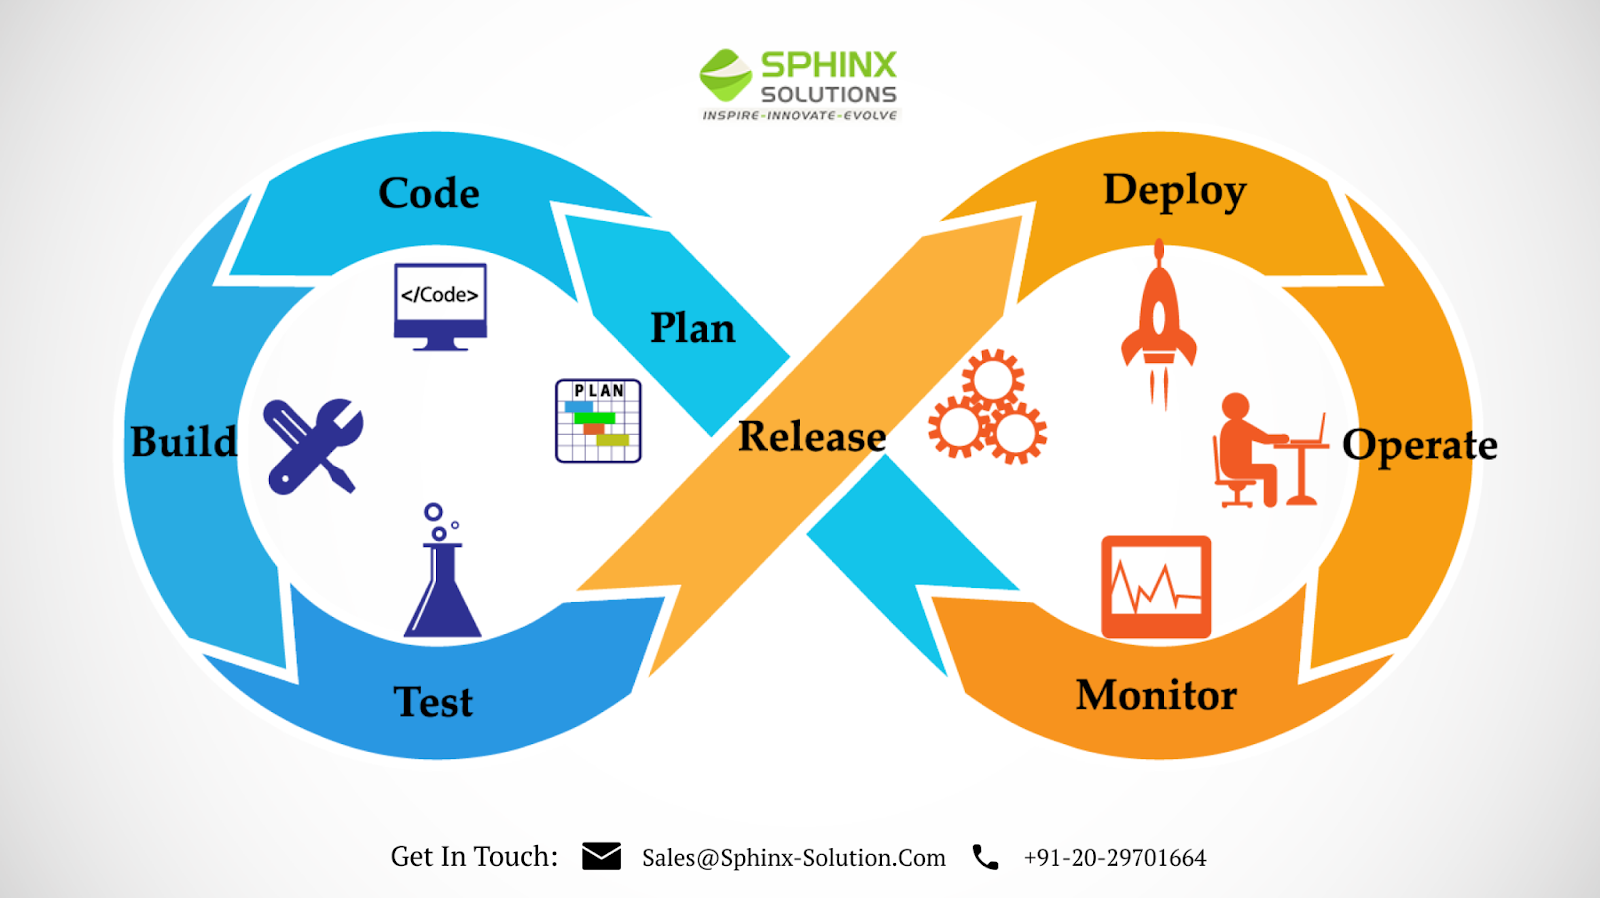 SPHINX

SOLUTIONS

INSPIRE INNOVATE - EVOLVE

 

Get In Touch: Sales@Sphinx-Solution.Com  ¥g  +91-20-29701664